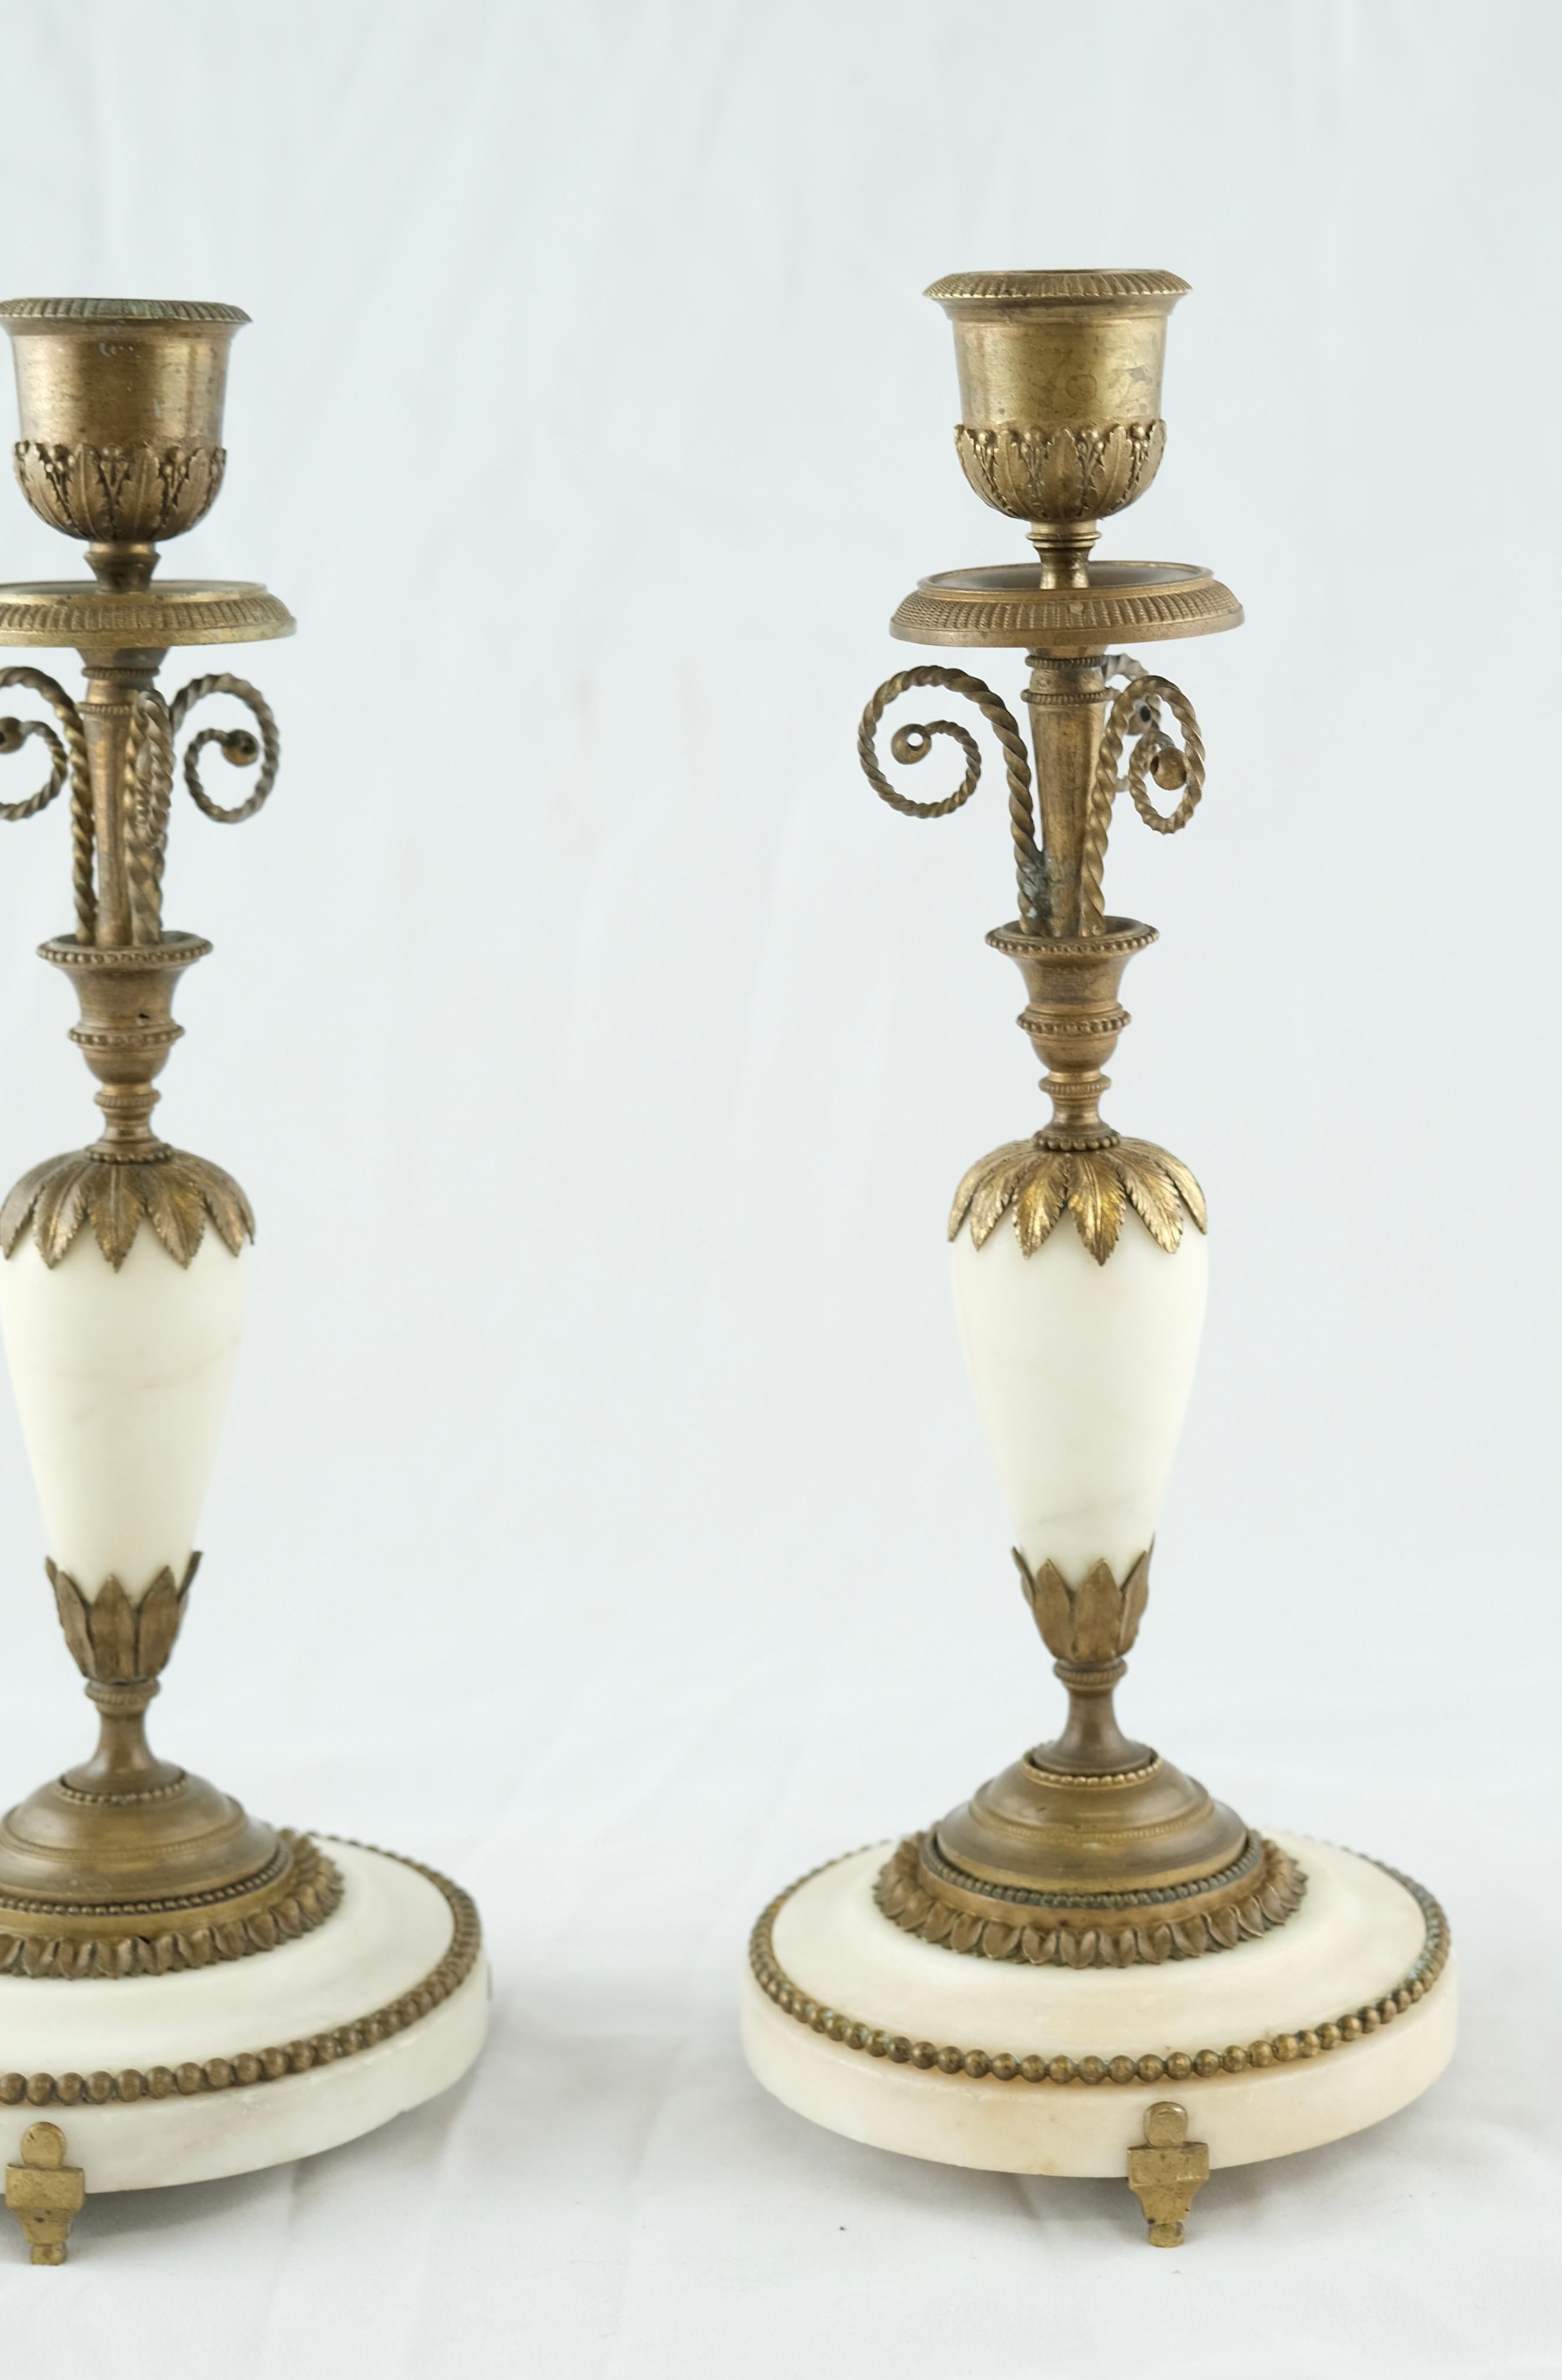 European Pair of French Directoire Candlesticks Made in the 1790s For Sale